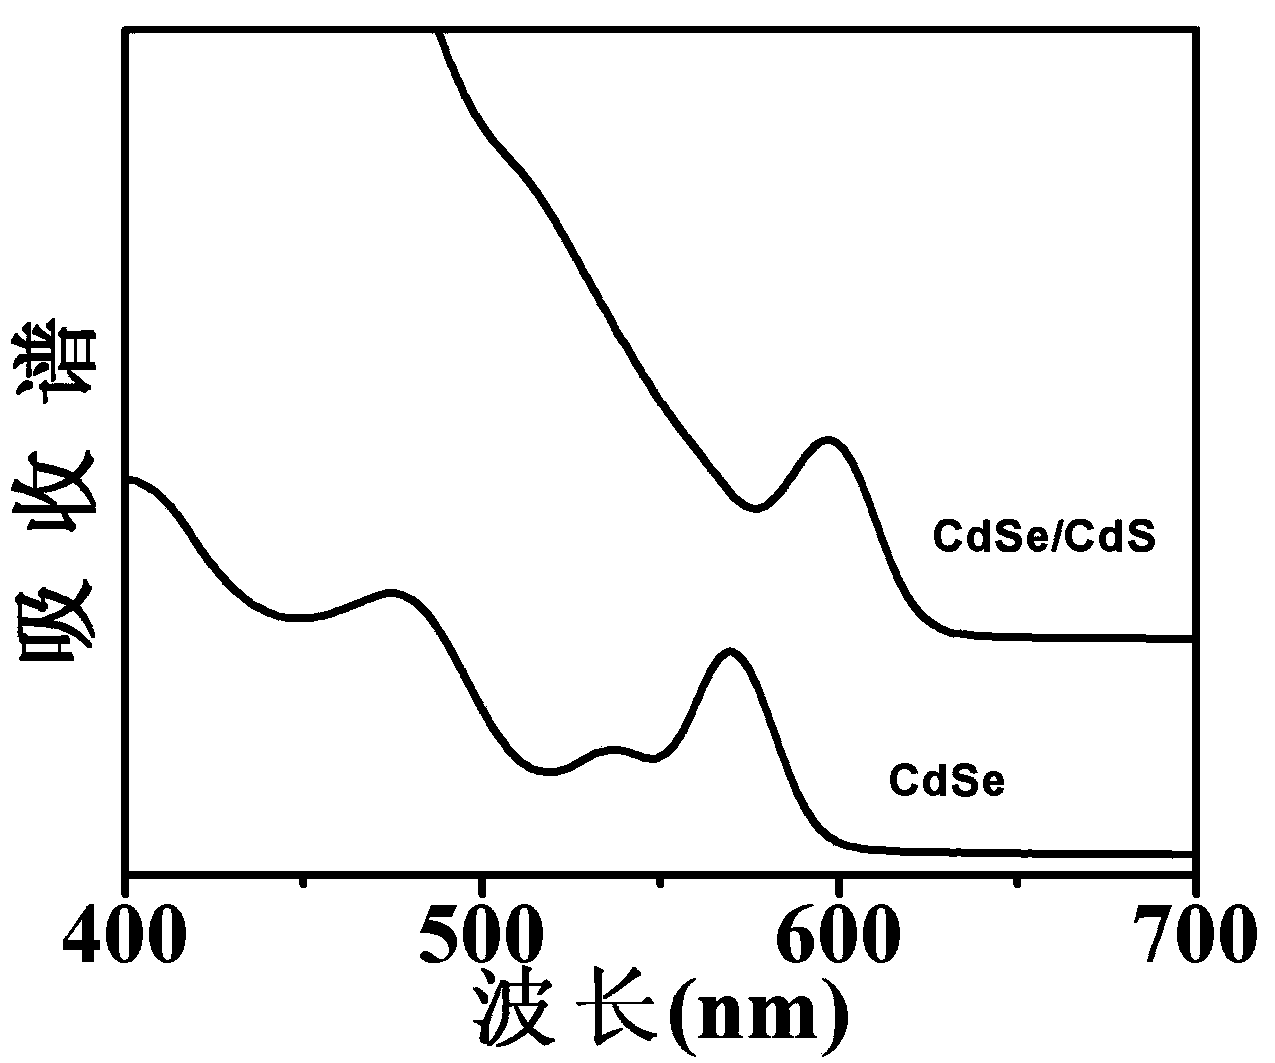 Preparation method for synthesizing CdSe/CdS core-shell structure quantum dots through one step